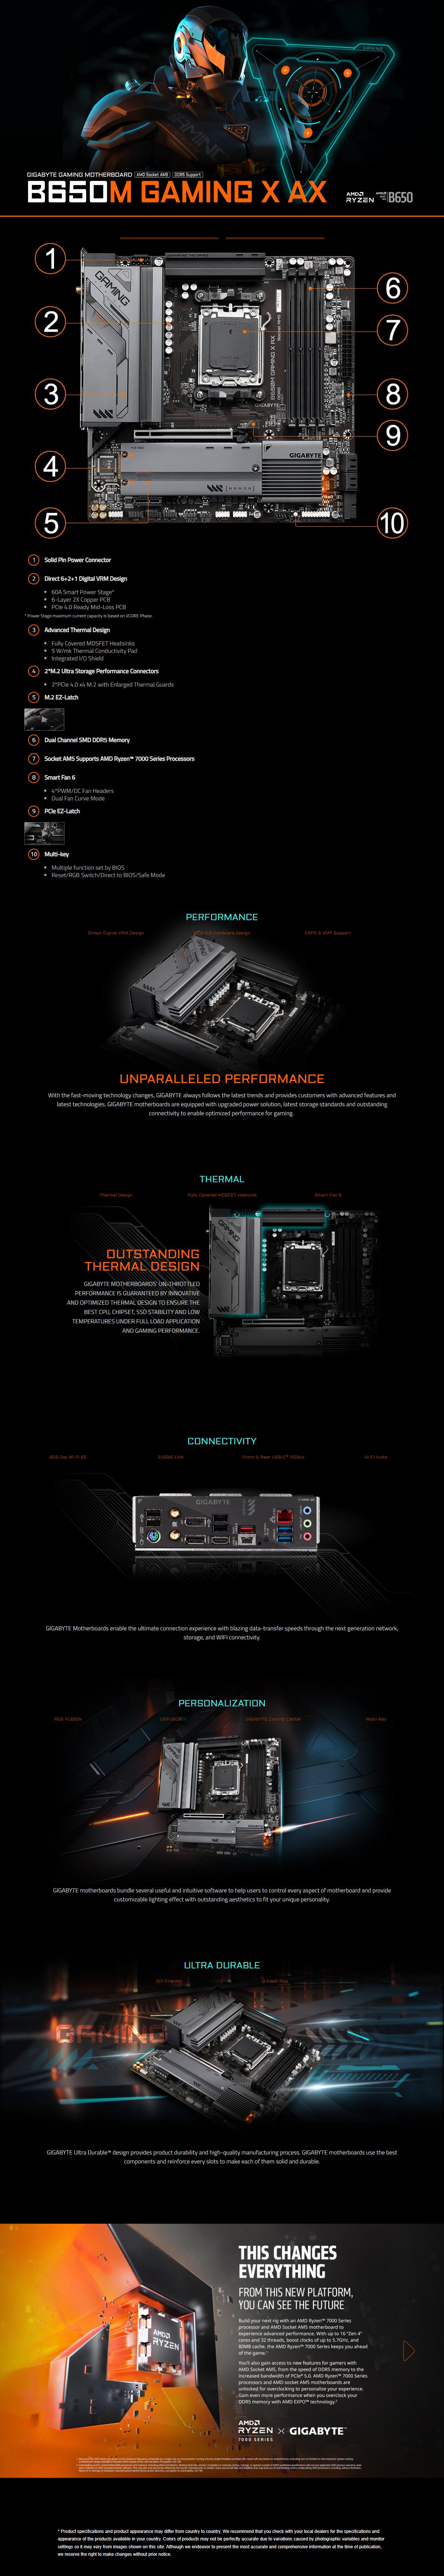 A large marketing image providing additional information about the product Gigabyte B650M Gaming X AX AM5 mATX Desktop Motherboard - Additional alt info not provided